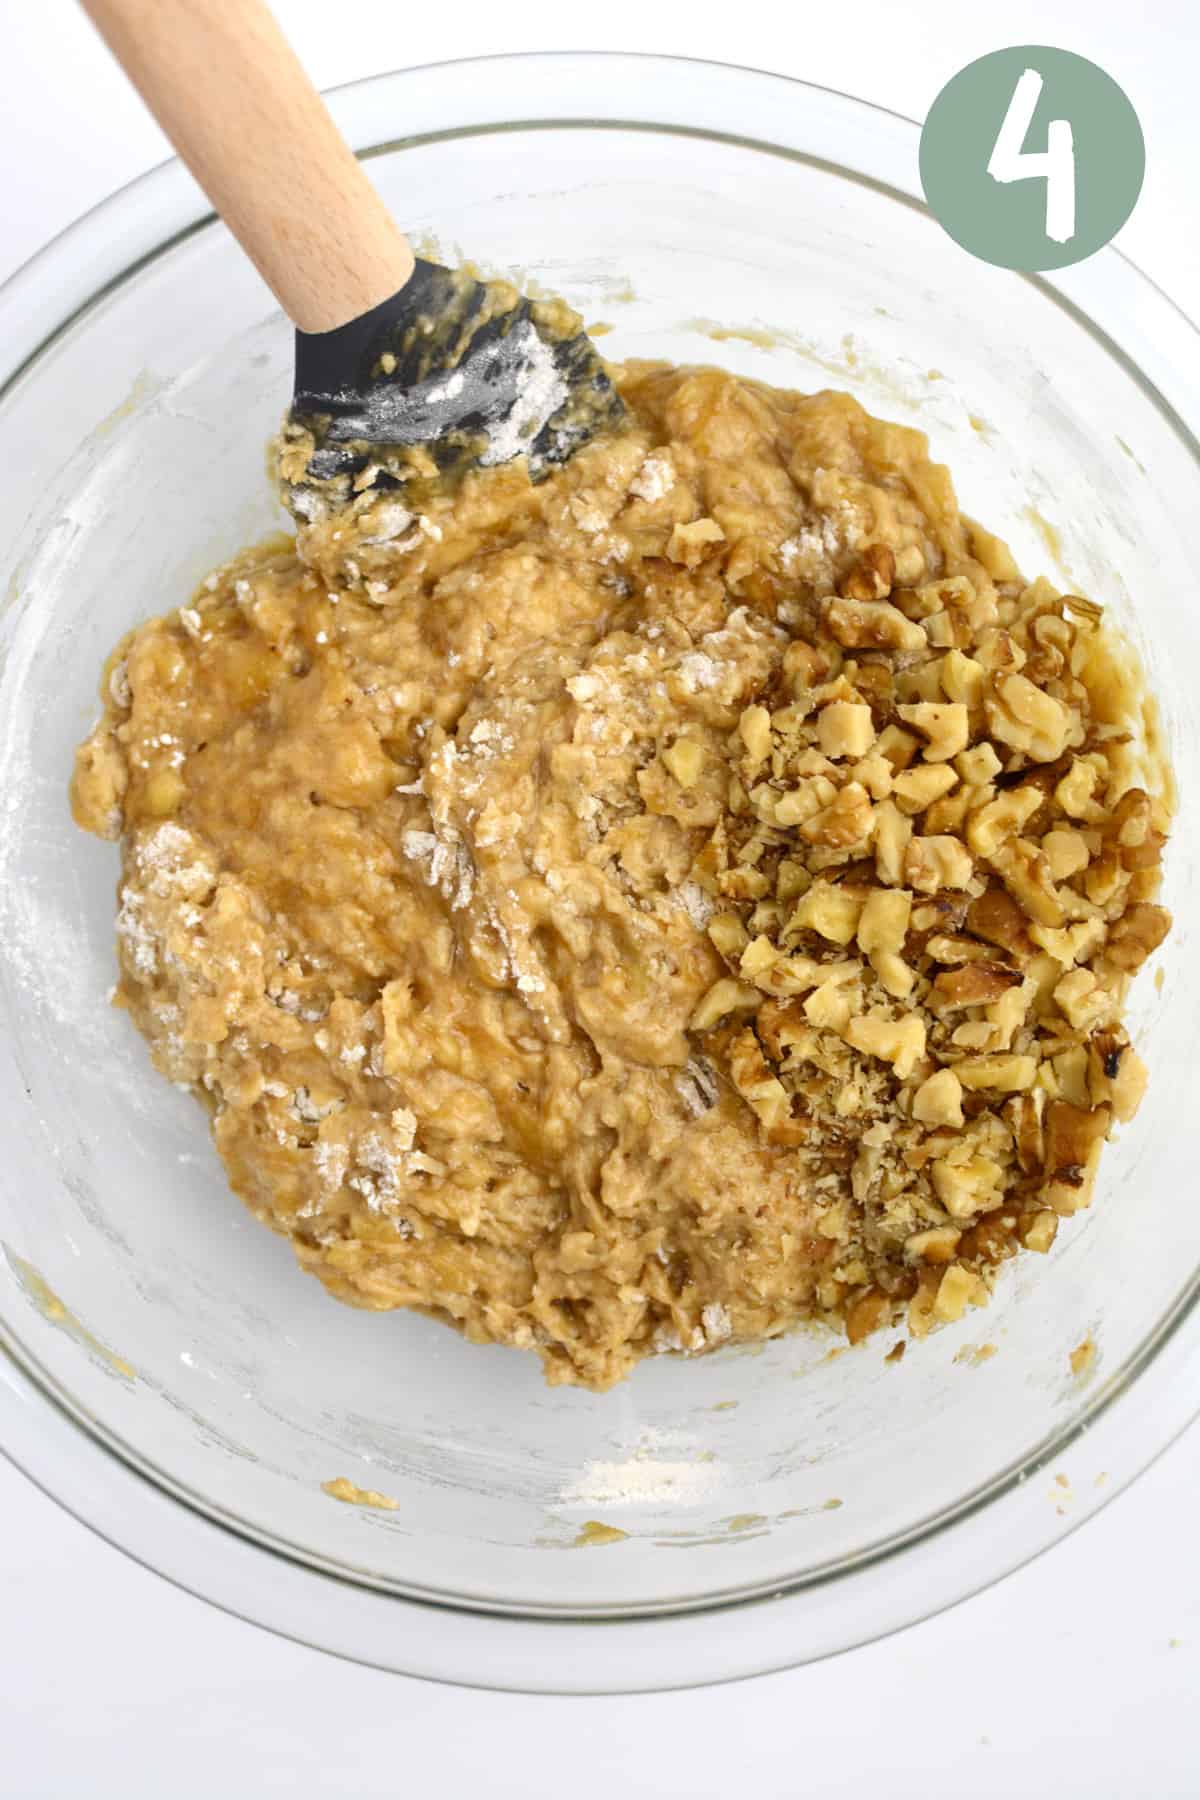 Vegan banana bread batter with walnuts on top in a glass bowl.